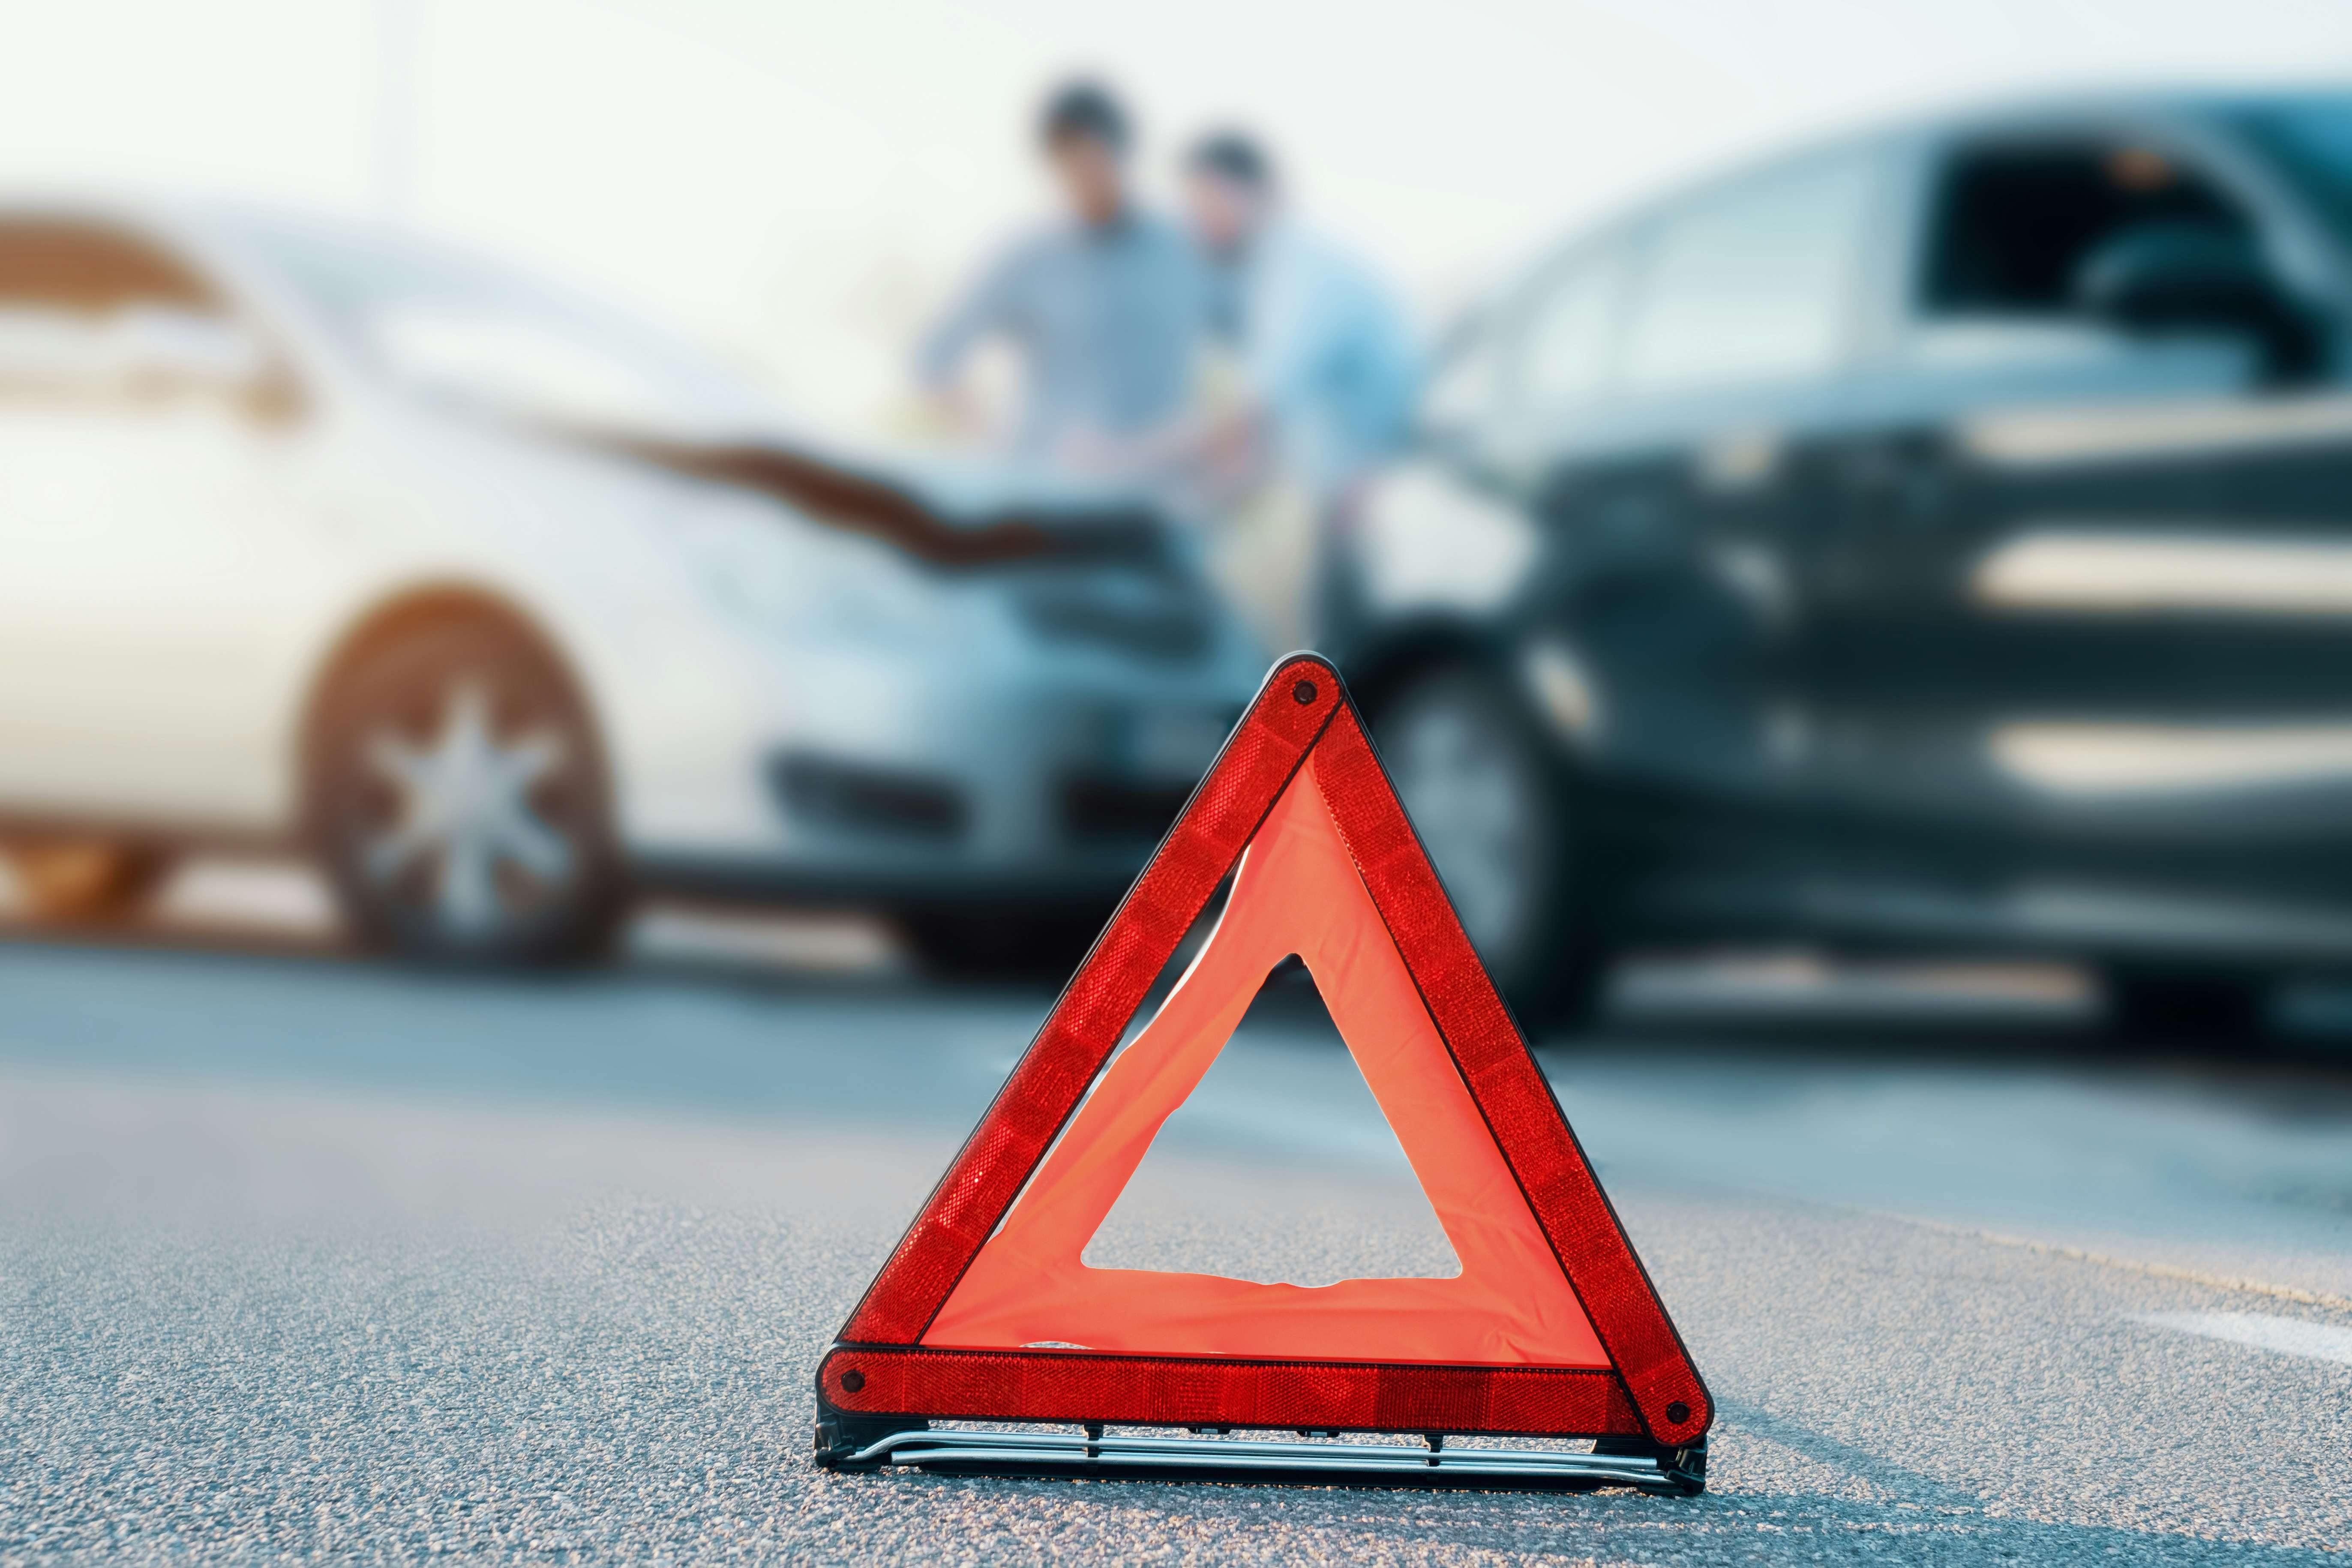 Two cars in the road following and accident or crash, red warning triangle in front of them